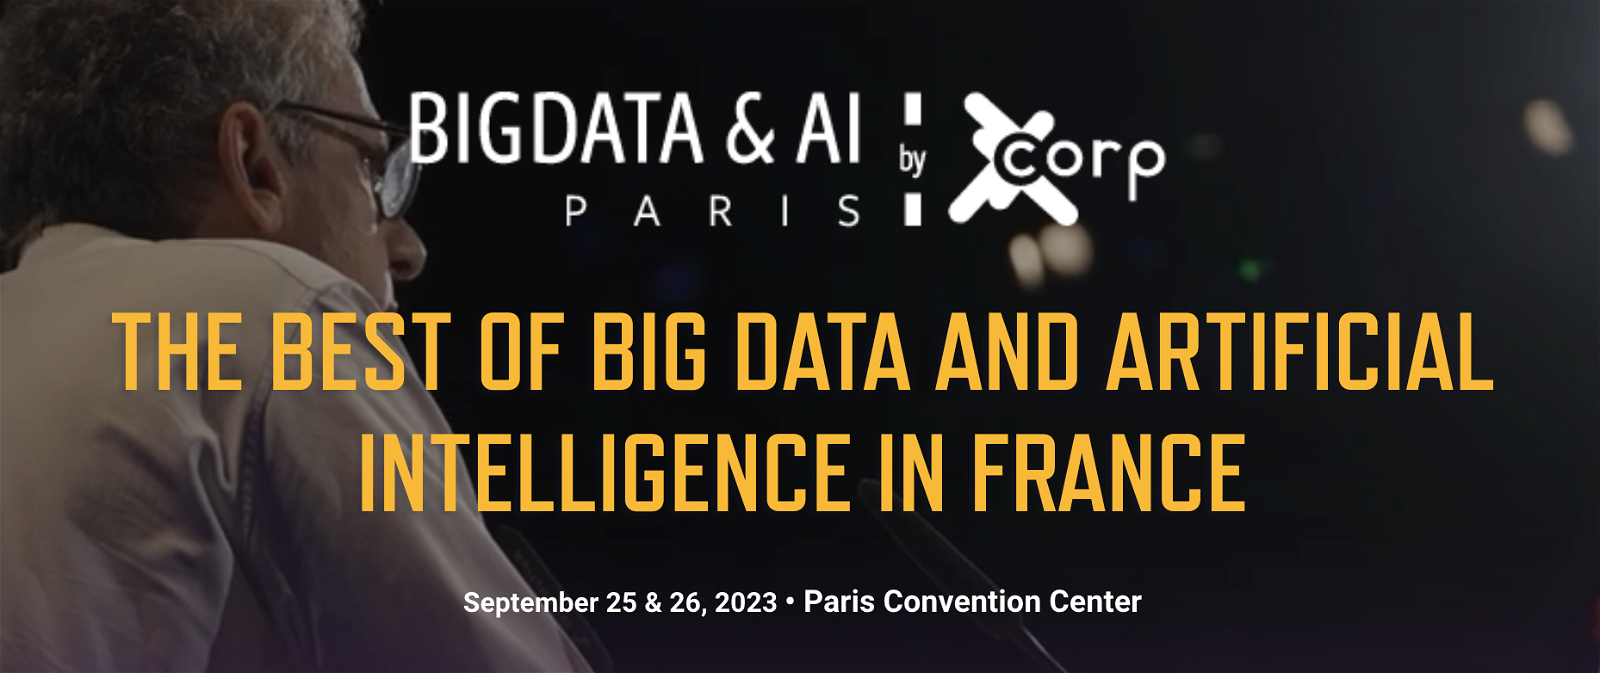 Big Data and AI Conference in Paris